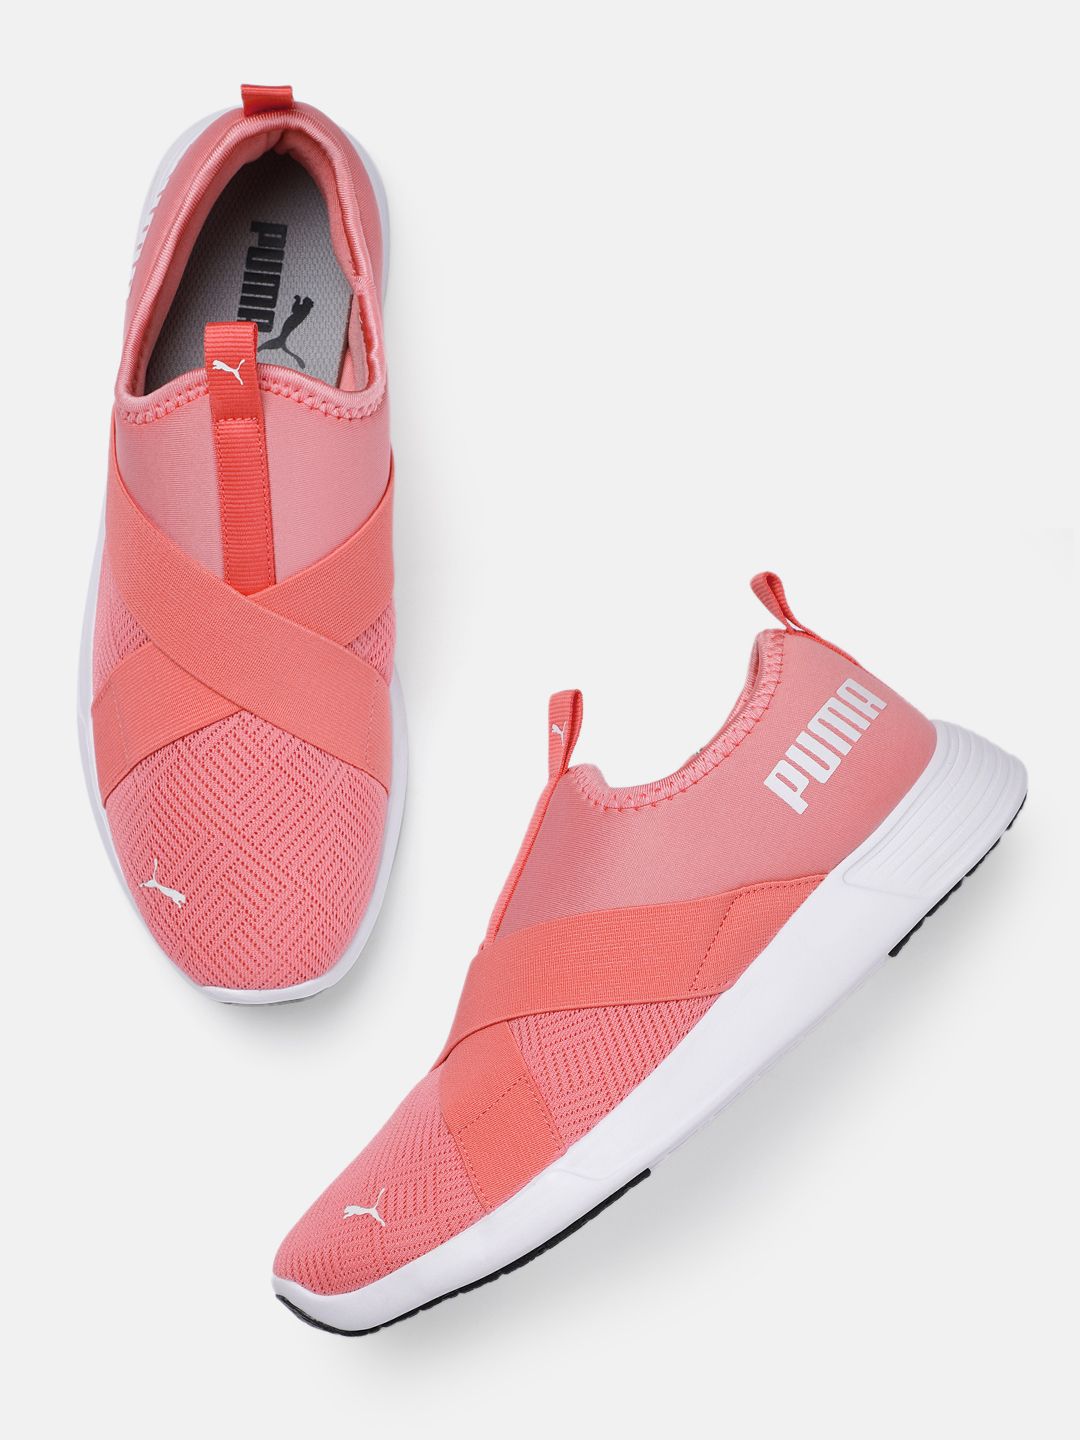 Puma Women Peach-Coloured Textured Slip-On Sneakers Price in India